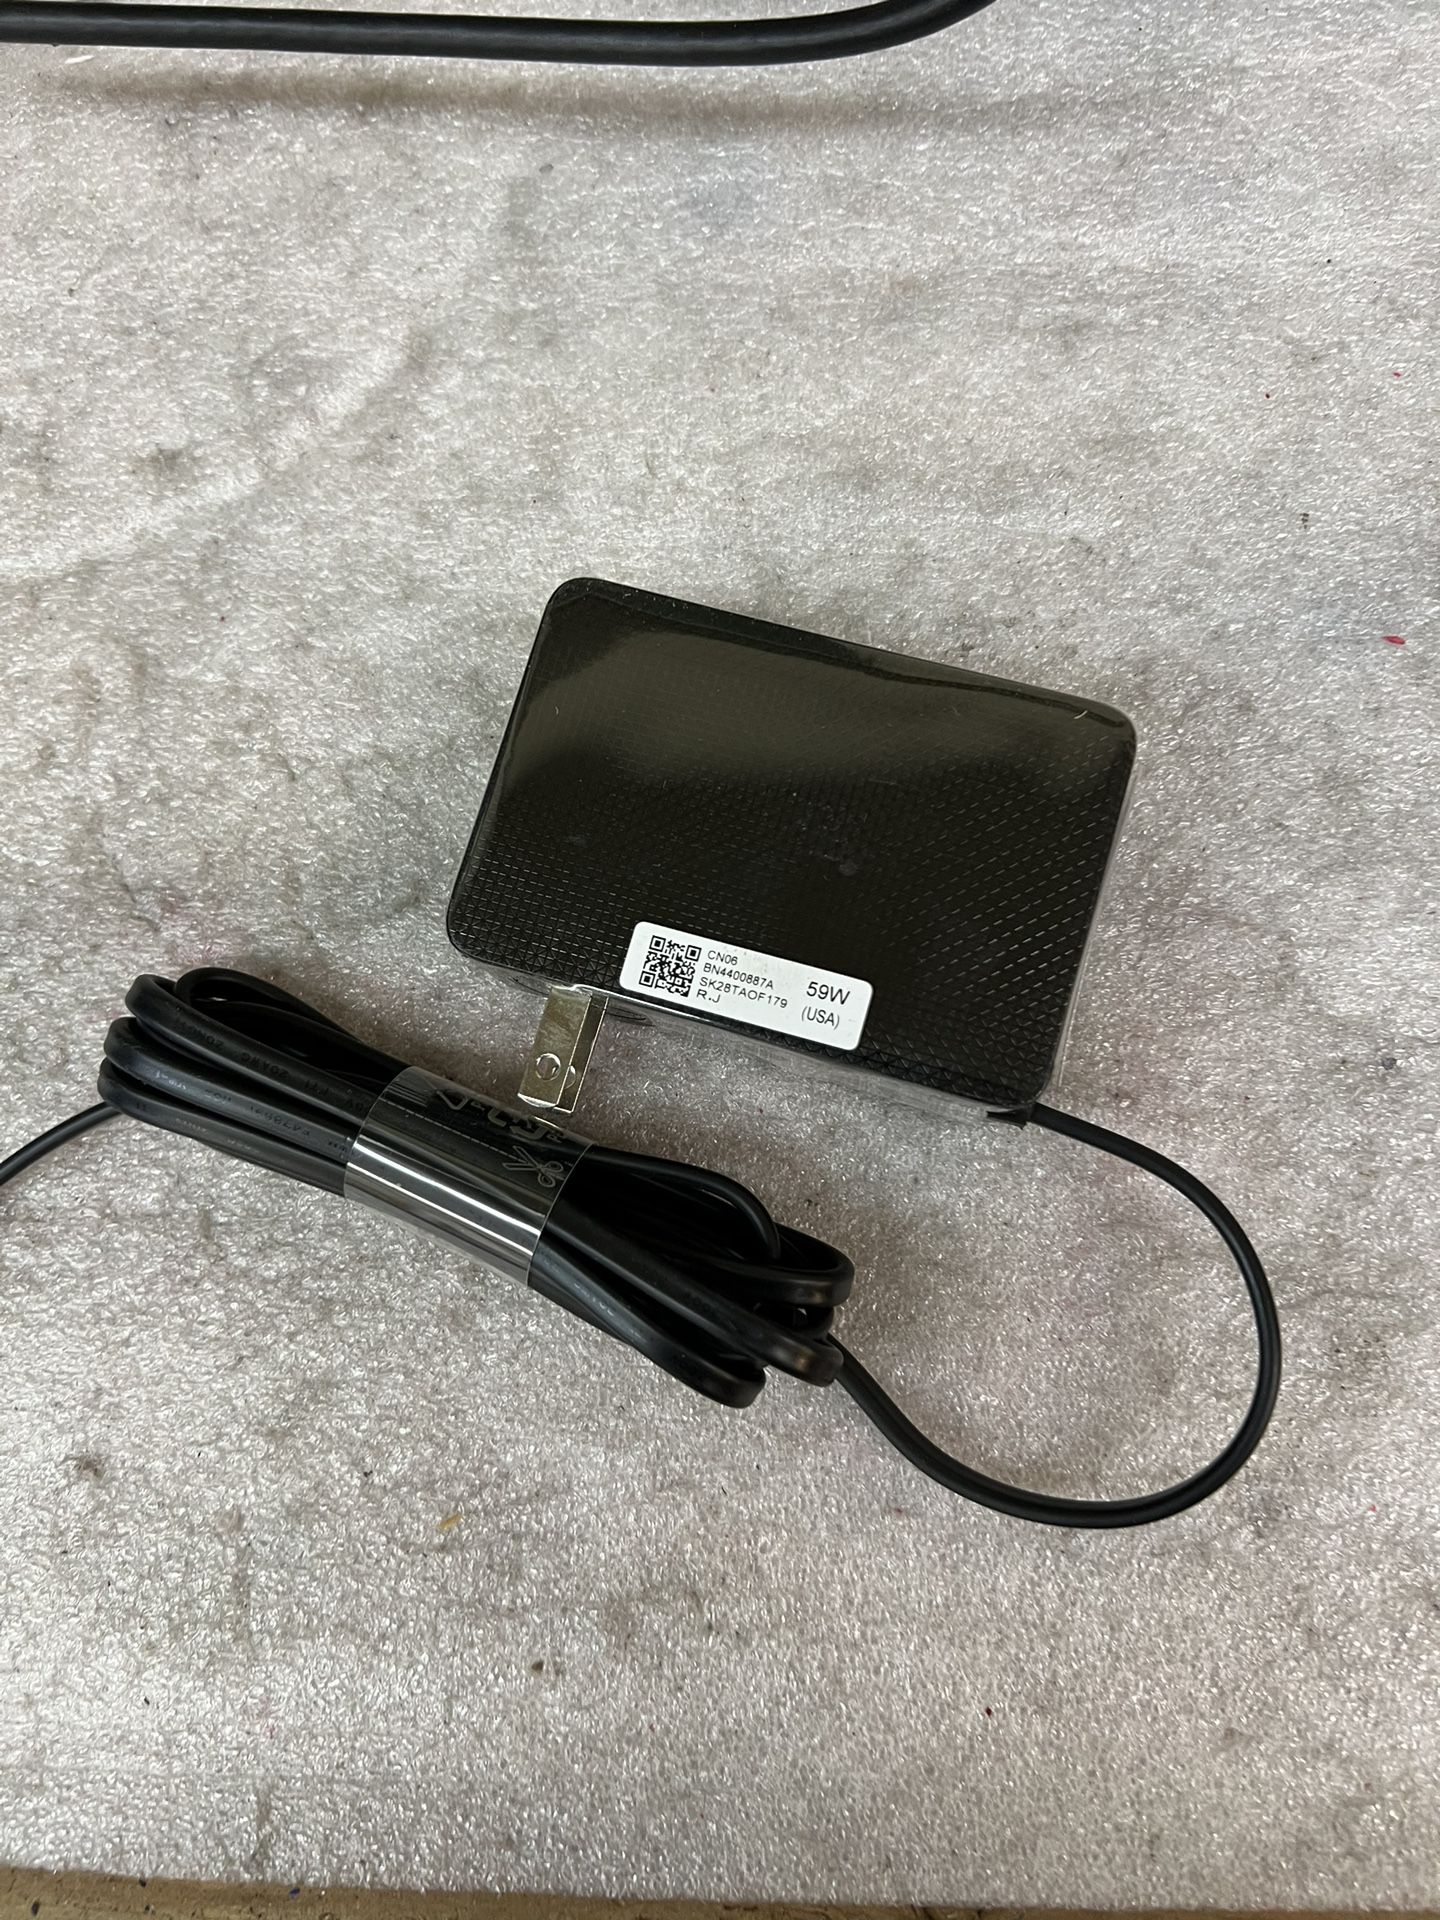 Samsung BN44-00887A AC Adapter 59W 19V 3.10A Charger A5919（ Monitor Power Supply)